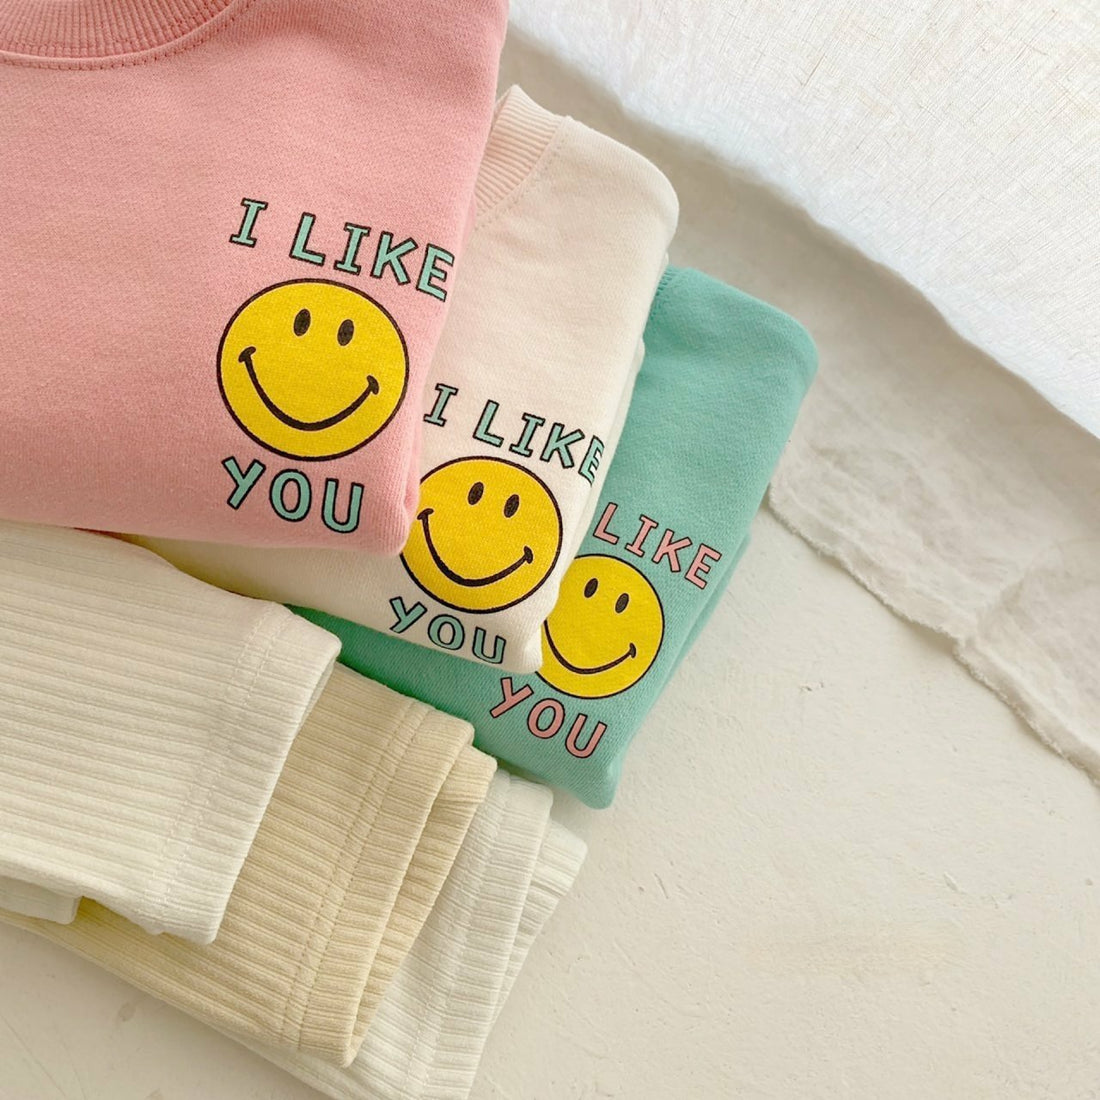 I LIKE YOU BABY SLOGAN OUTFIT